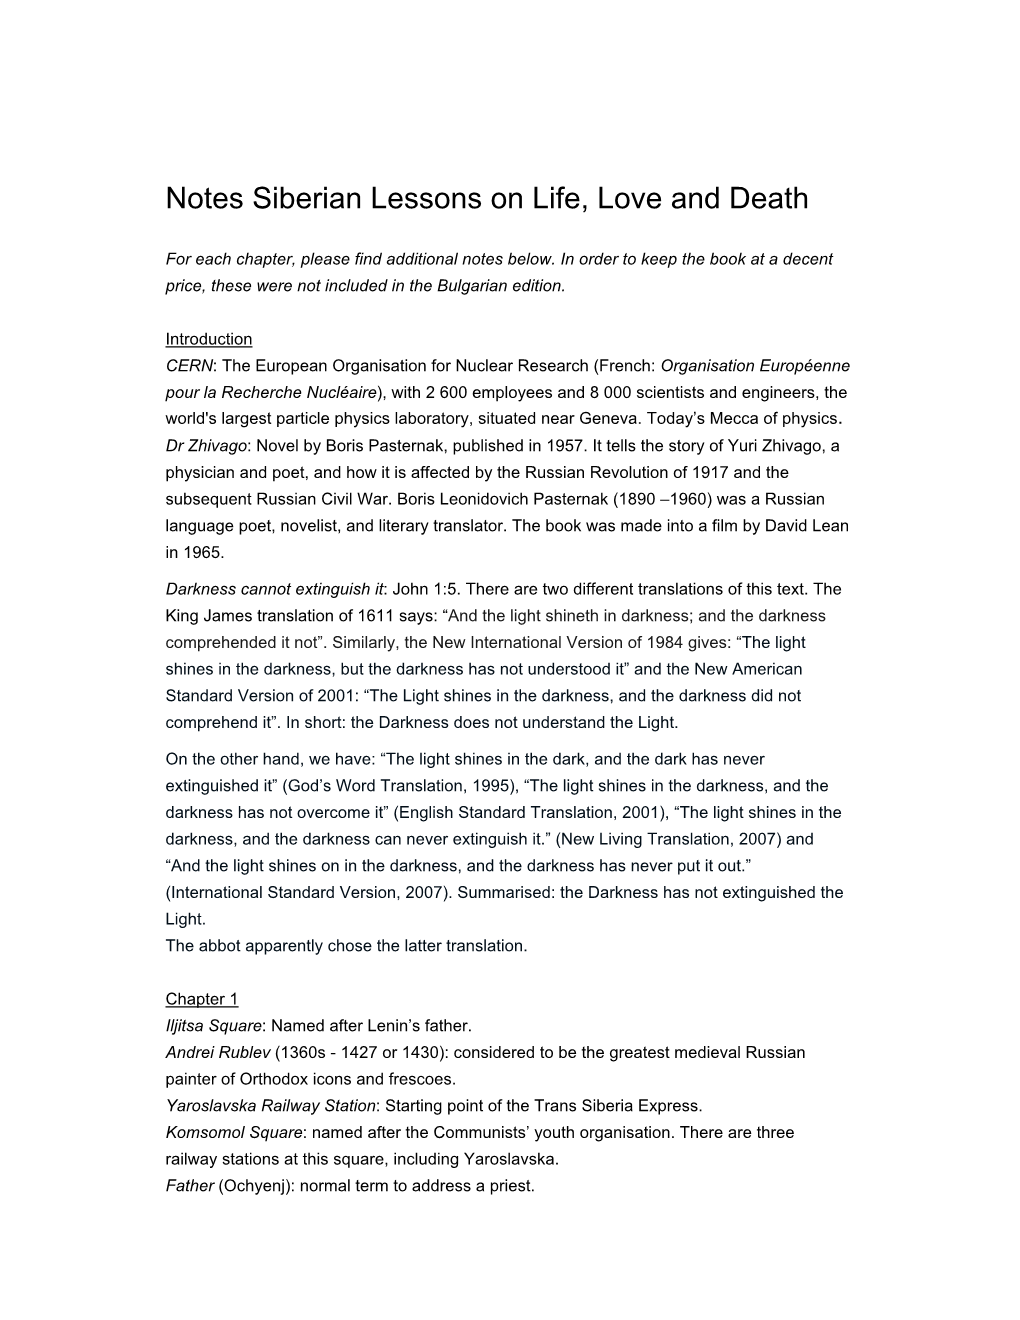 Notes Siberian Lessons on Life, Love and Death